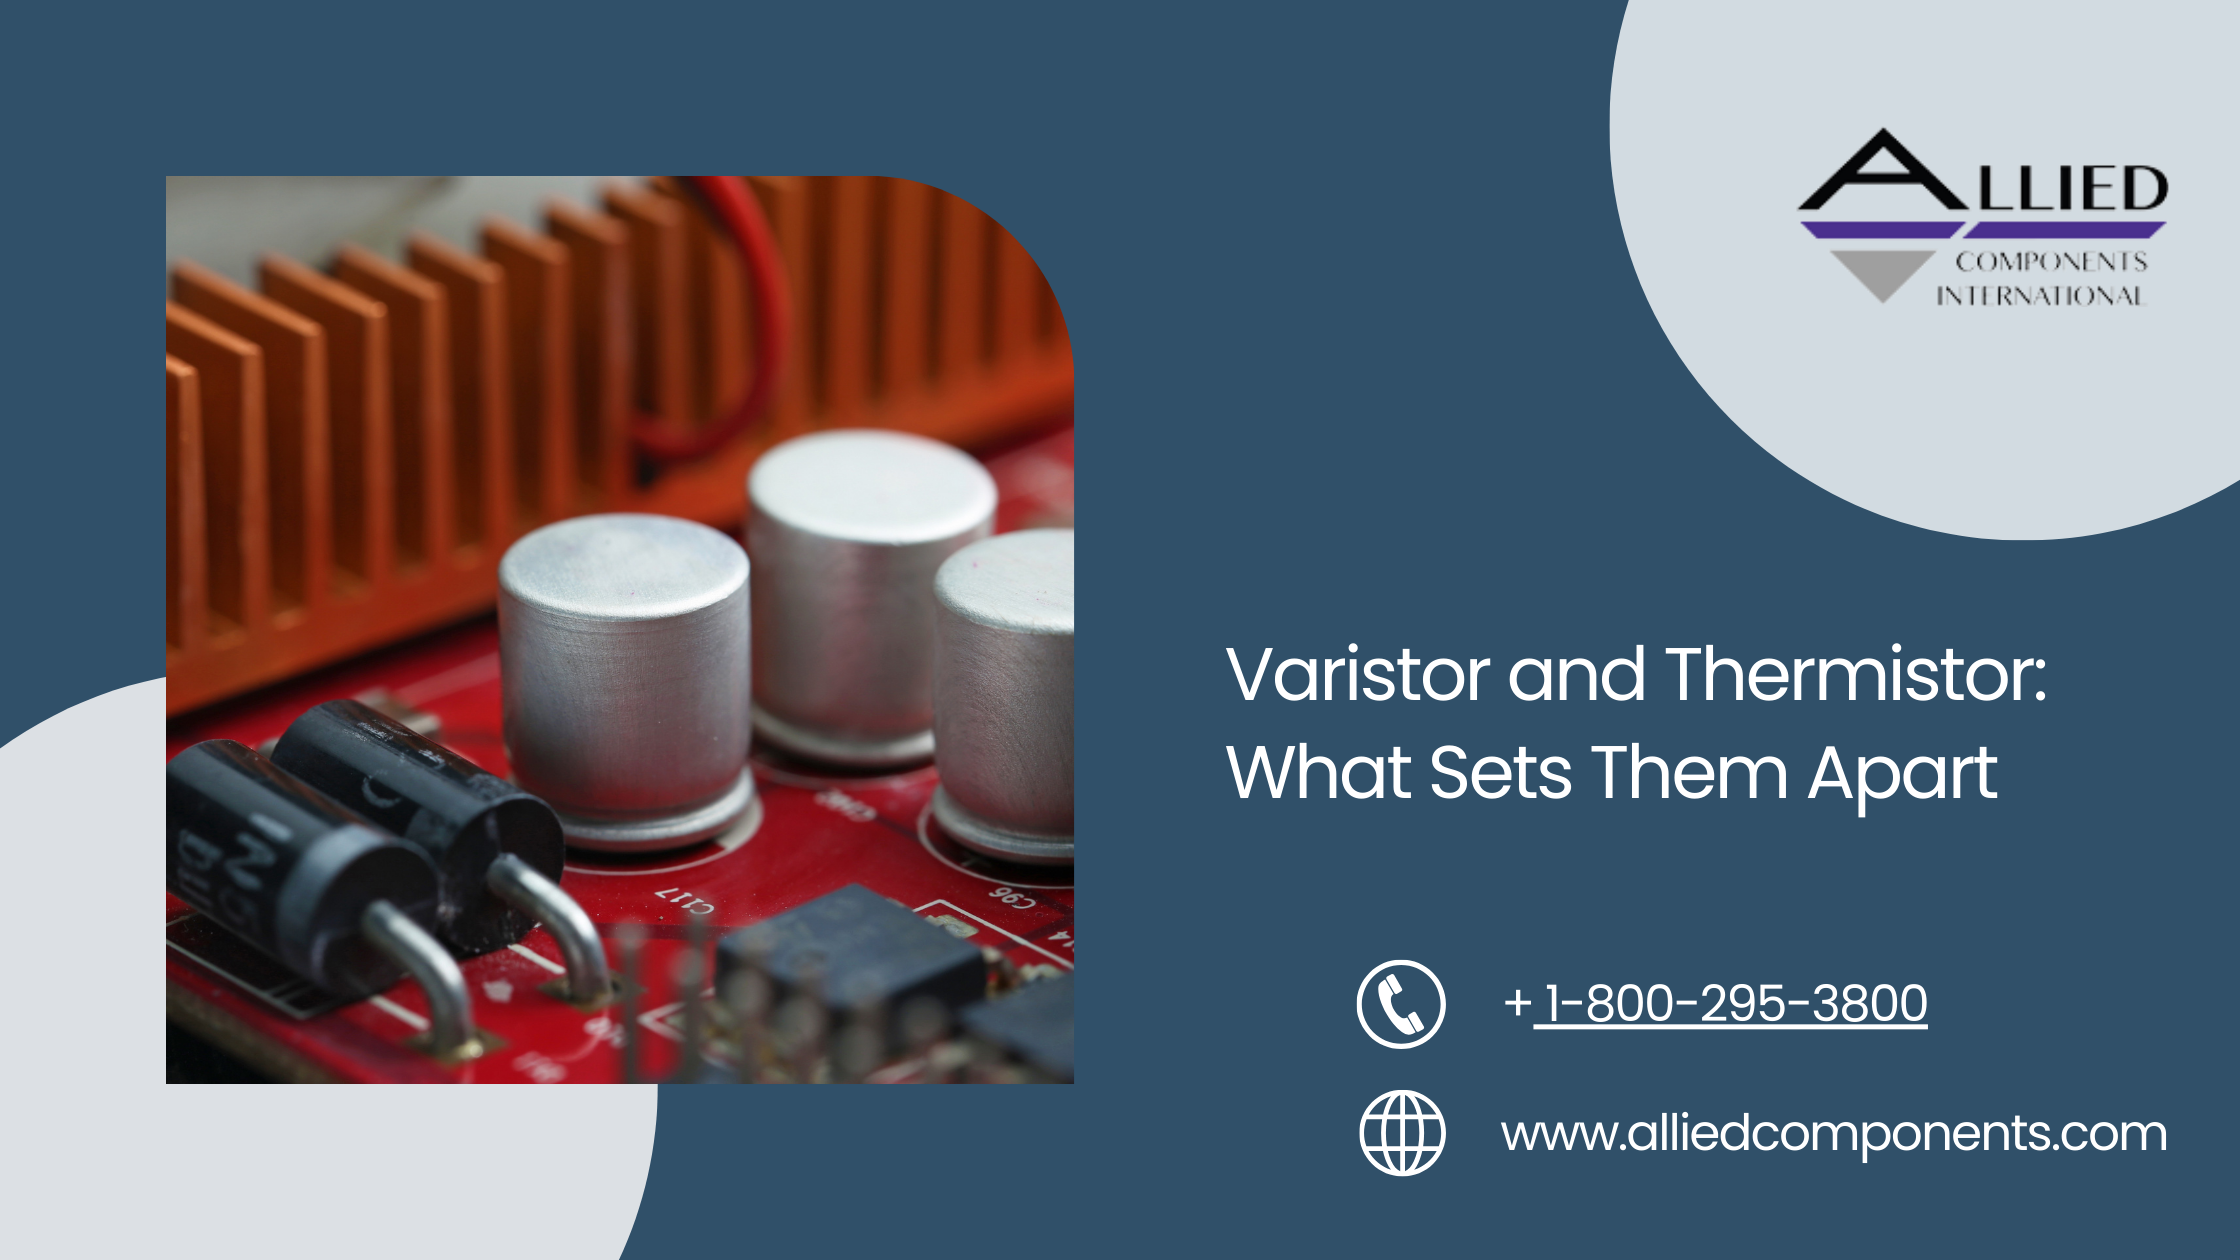 Varistor and Thermistor: What Sets Them Apart